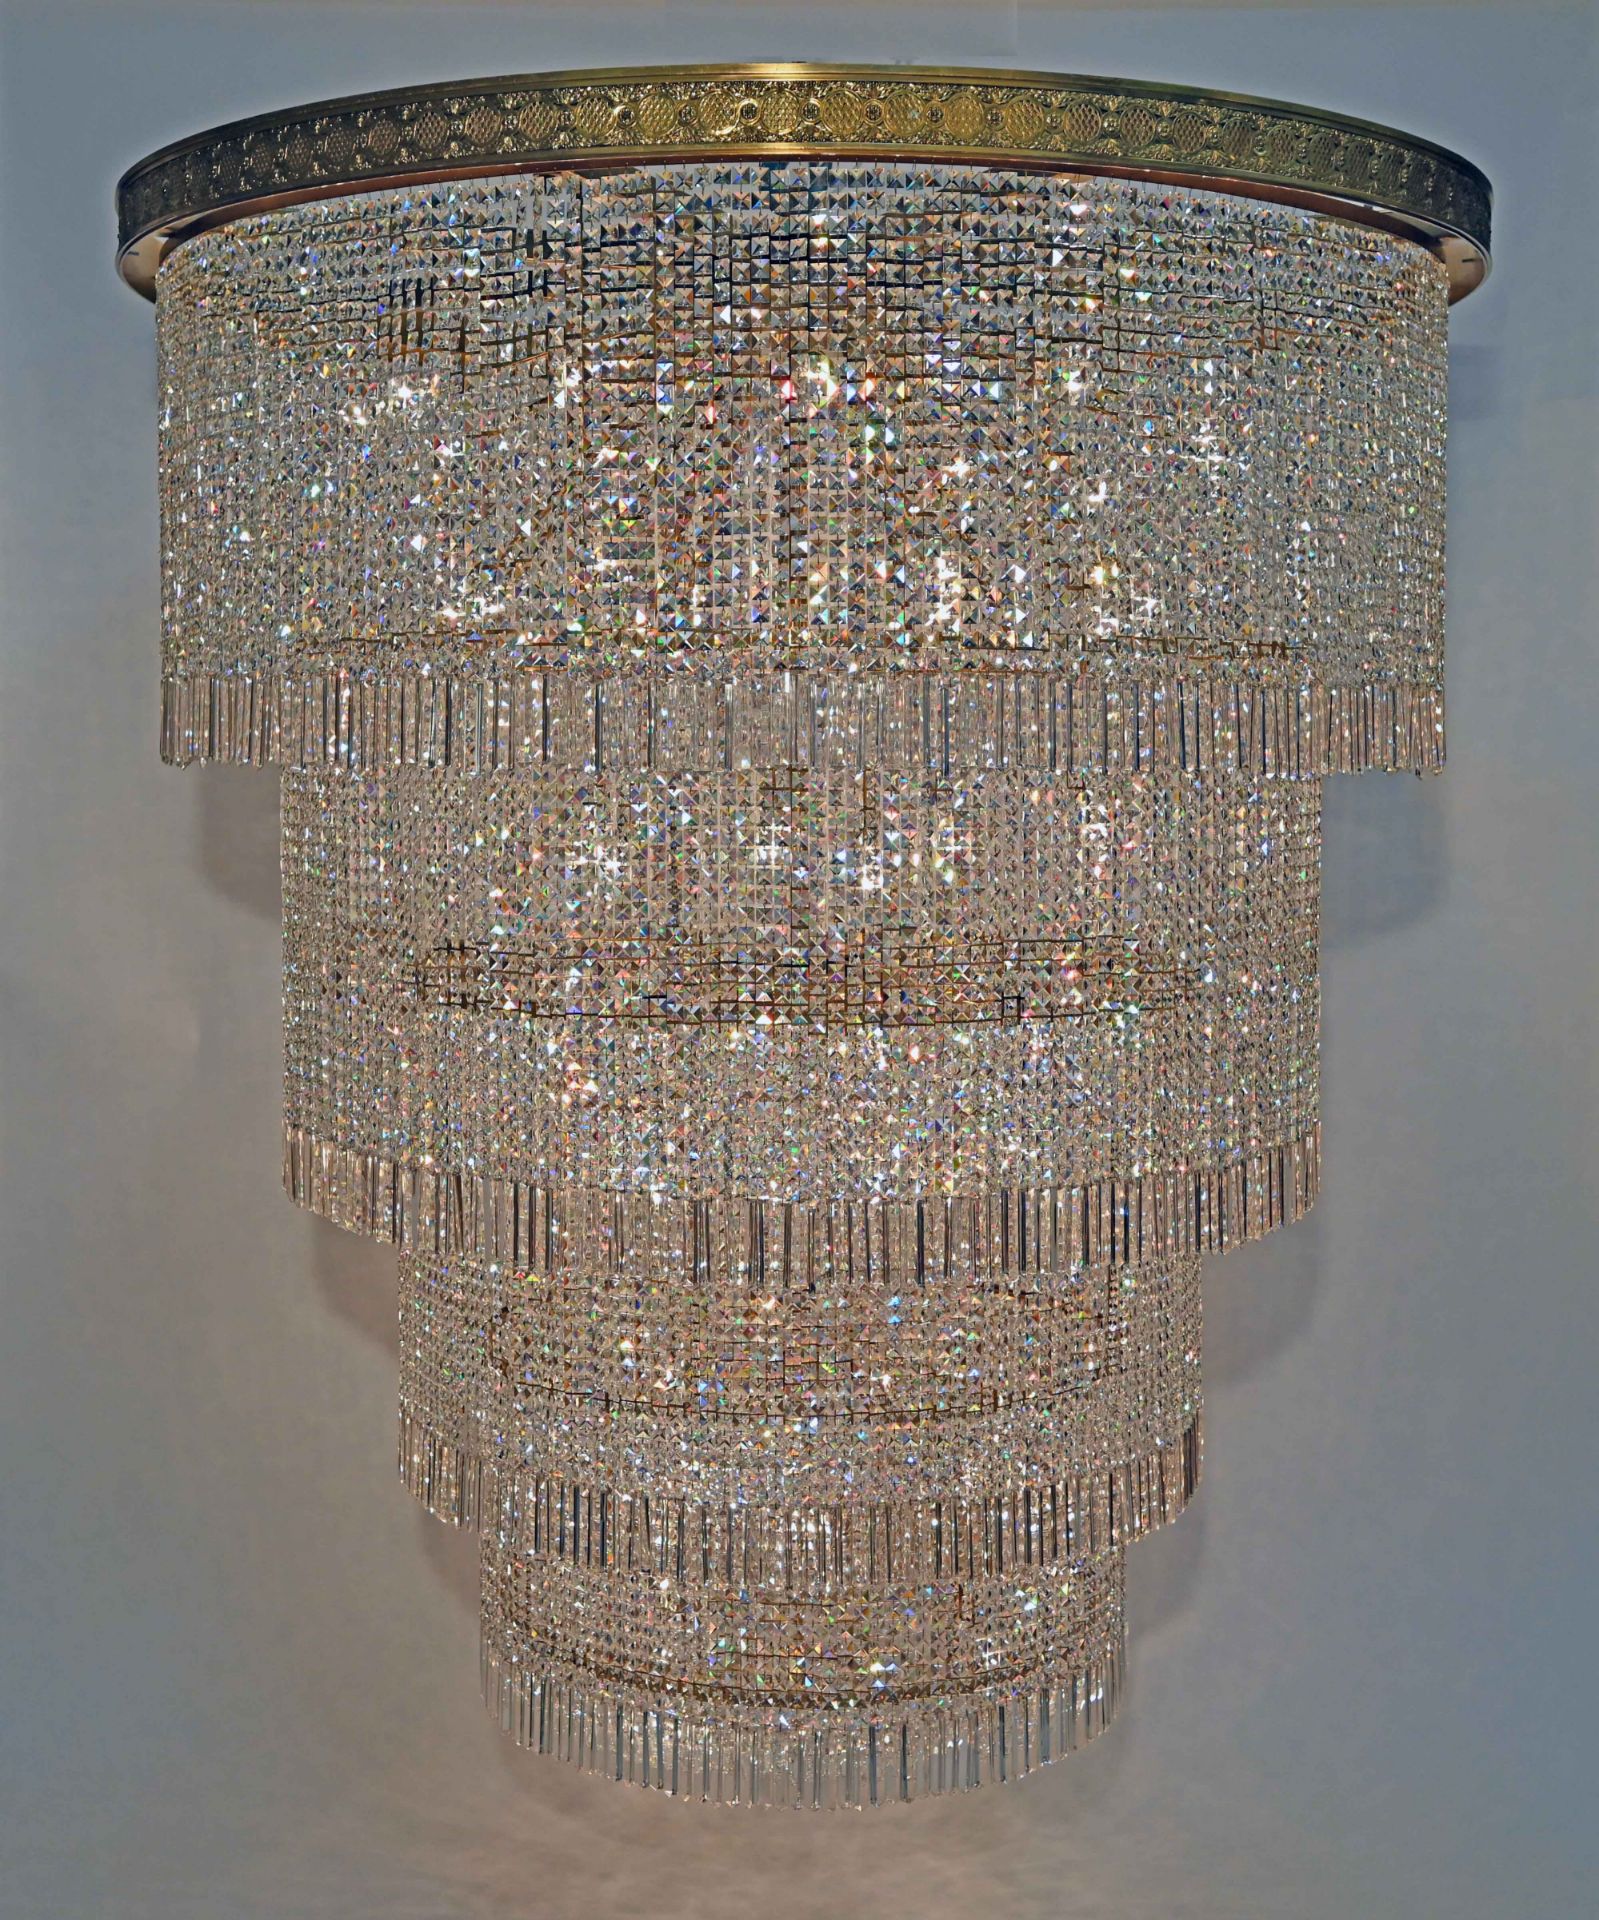 Large Swarovski Cascade Chandelier High-End Style. A Luxury Crystal Chandelier A Piece Of Art And